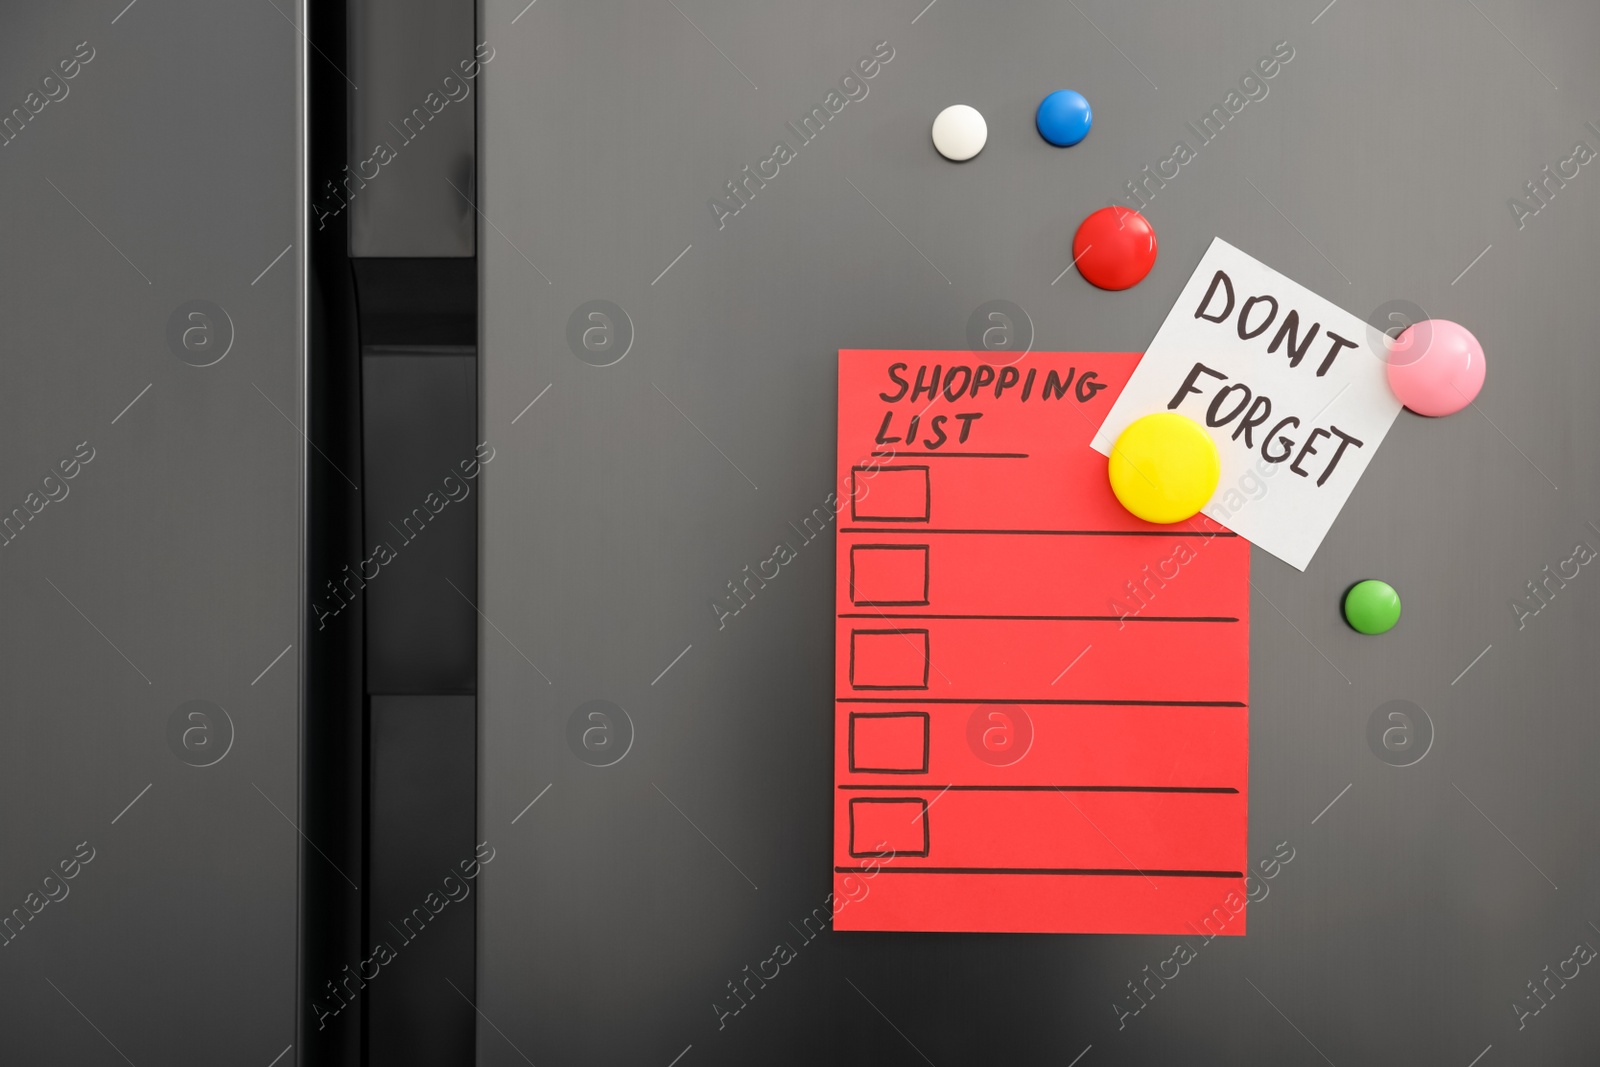 Photo of Note with phrase DON'T FORGET, shopping list and magnets on refrigerator, closeup